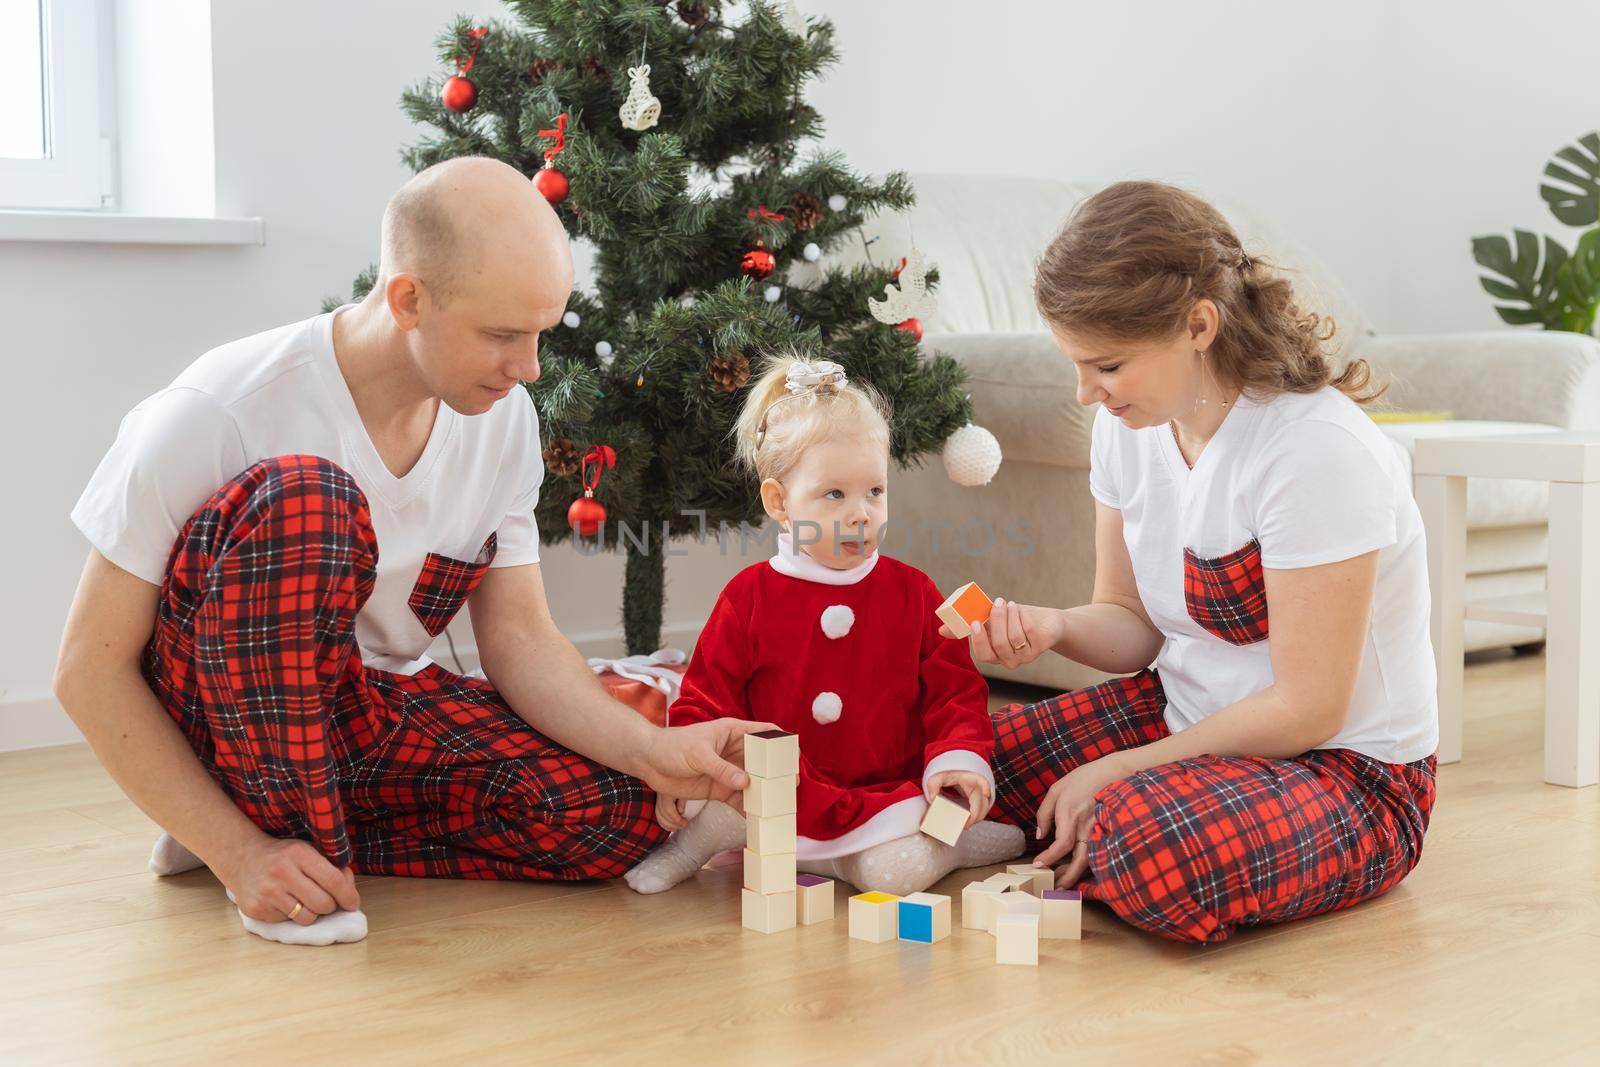 Toddler child with cochlear implant plays with parents under christmas tree - deafness and innovating medical technologies for hearing aid and diversity by Satura86